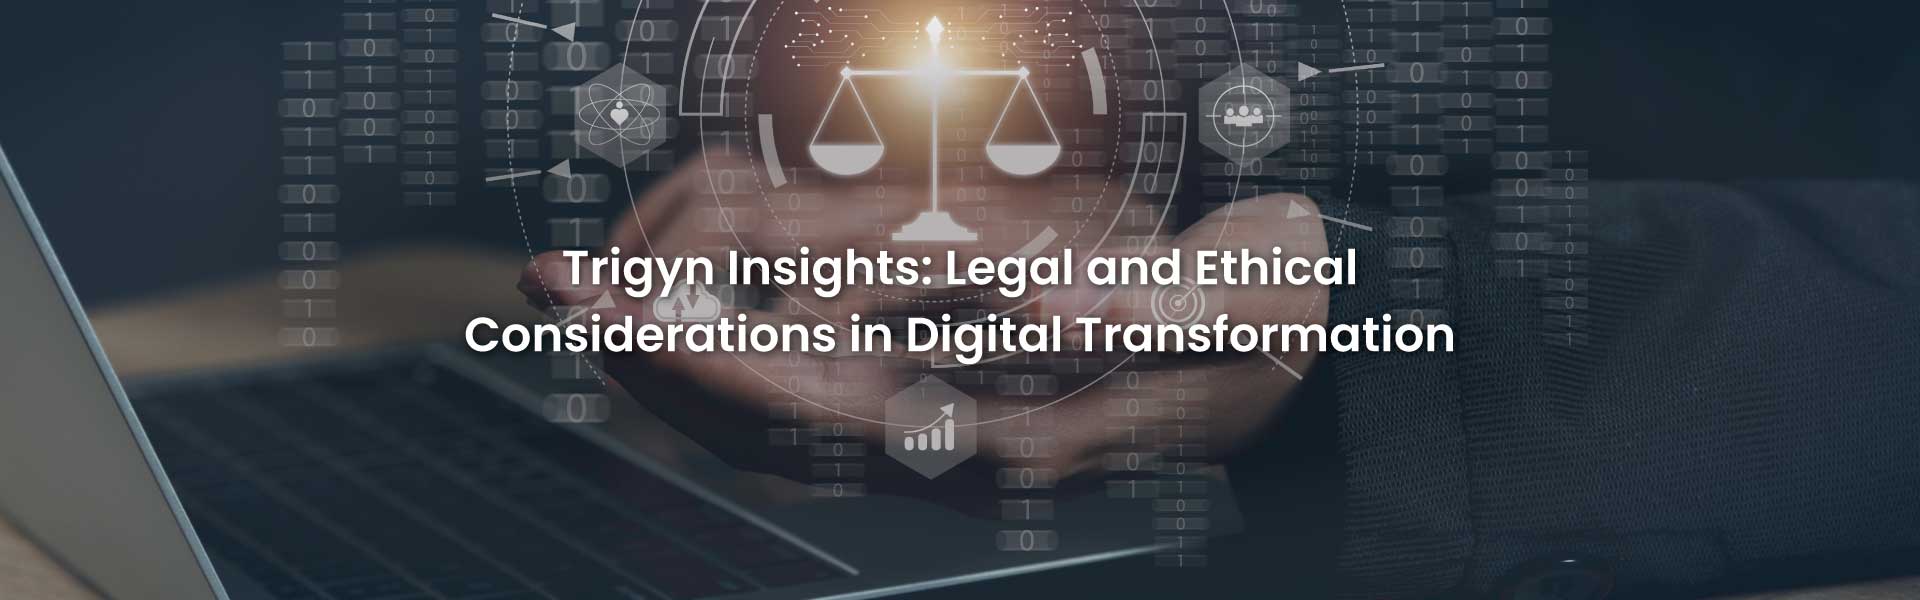  Ethical Aspects of Digital Transformation